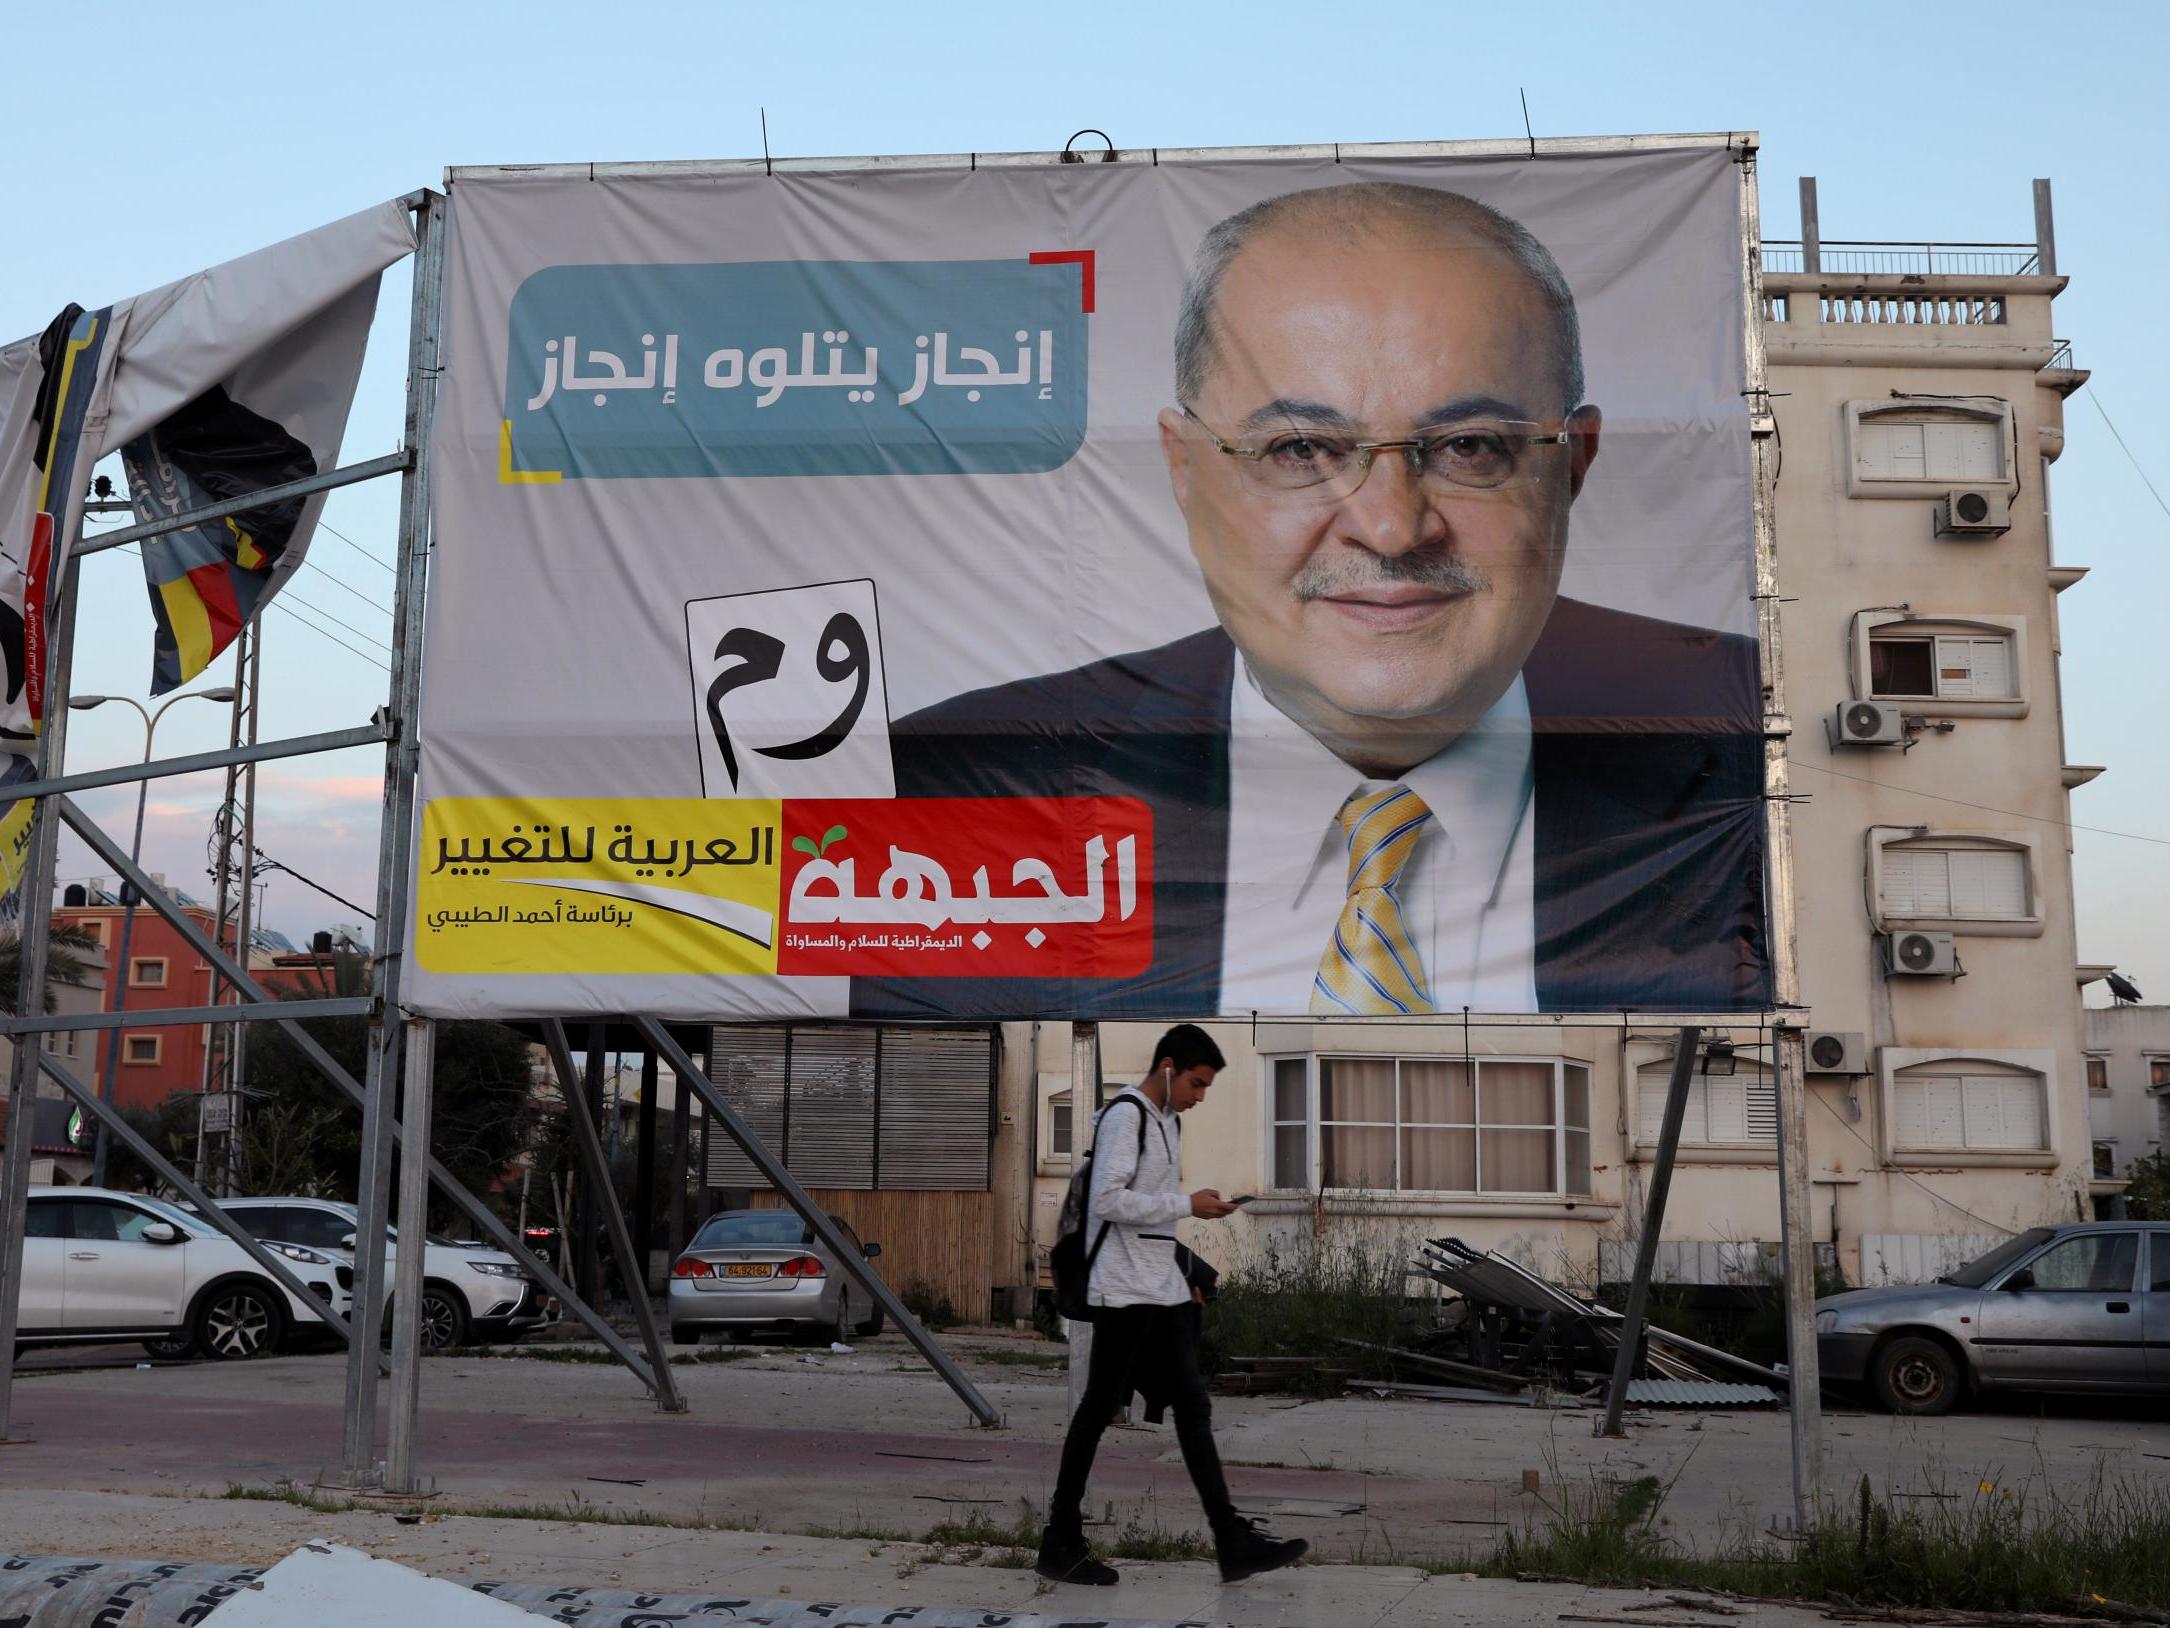 A youth walks past an Israeli election campaign banner depicting Ahmad Tibi, of the Hadash-Ta’al party in Taibe